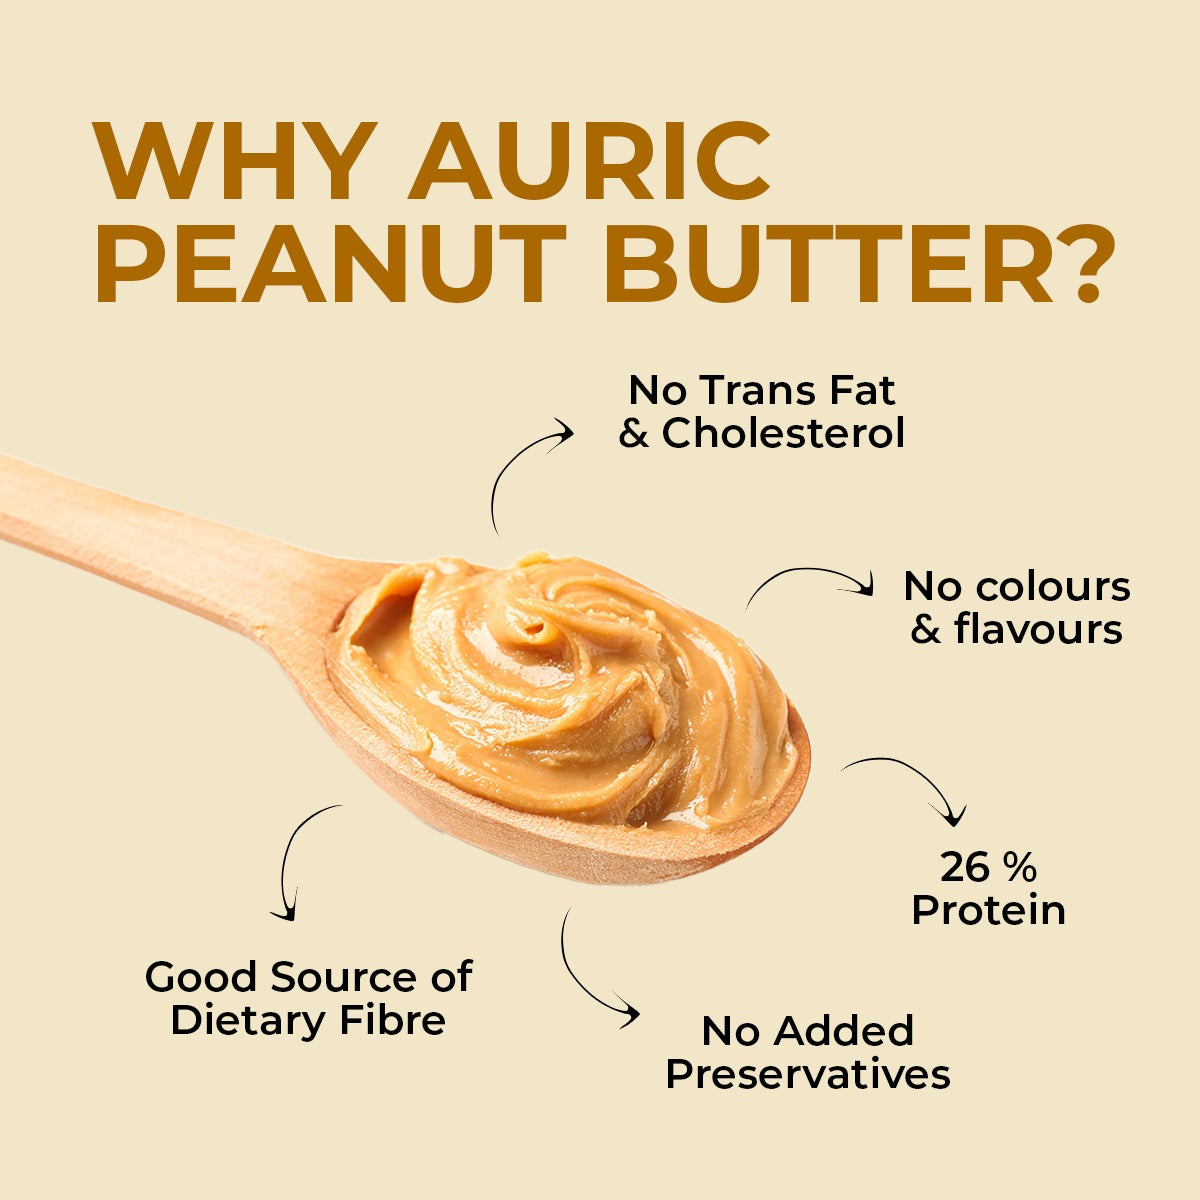 Auric Peanut Butter Smooth & Creamy | Gluten and Lactose-free | 340 g